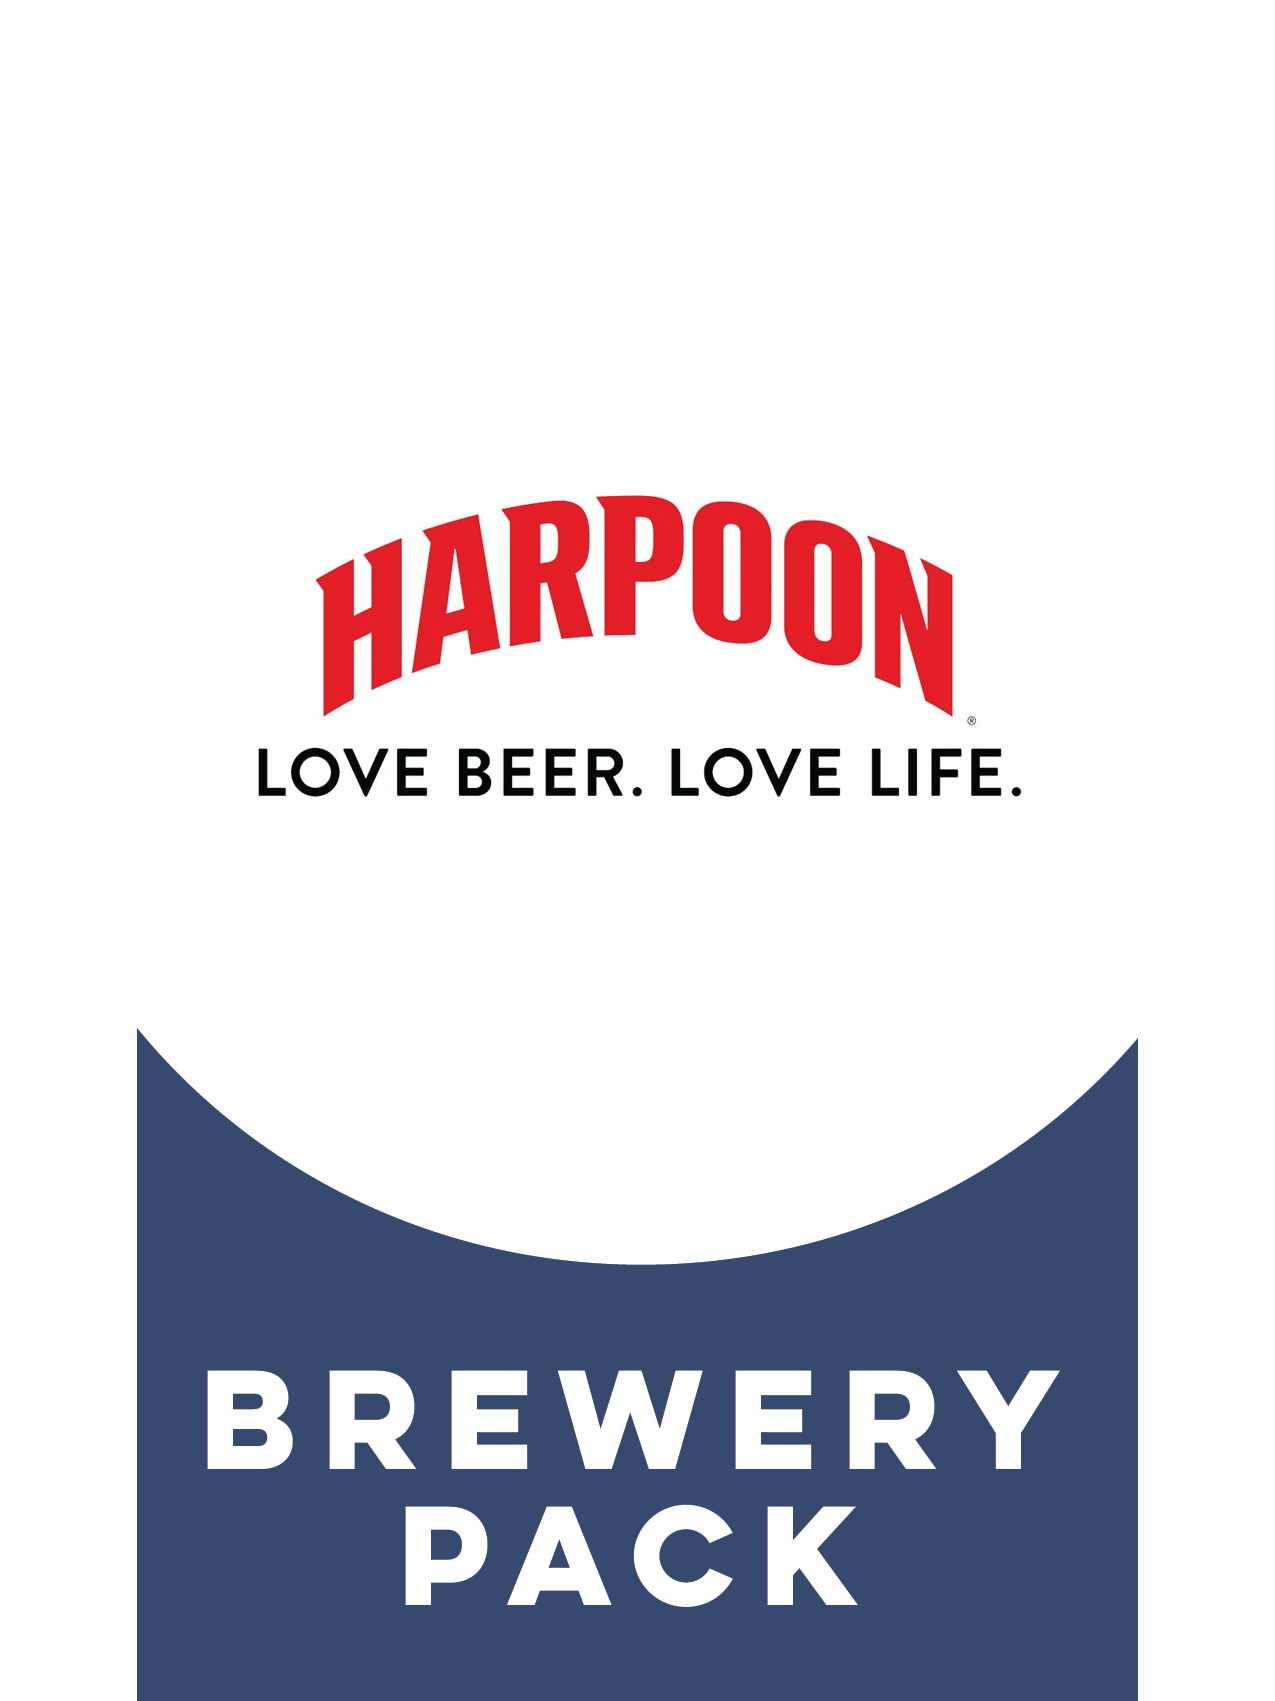 -Harpoon- Harpoon Brewery Pack-Packs & Cases- Only @ Beer Republic - The best online beer store for American & Canadian craft beer - Buy beer online from the USA and Canada - Bier online kopen - Amerikaans bier kopen - Craft beer store - Craft beer kopen - Amerikanisch bier kaufen - Bier online kaufen - Acheter biere online - IPA - Stout - Porter - New England IPA - Hazy IPA - Imperial Stout - Barrel Aged - Barrel Aged Imperial Stout - Brown - Dark beer - Blond - Blonde - Pilsner - Lager - Wheat - Weizen - 